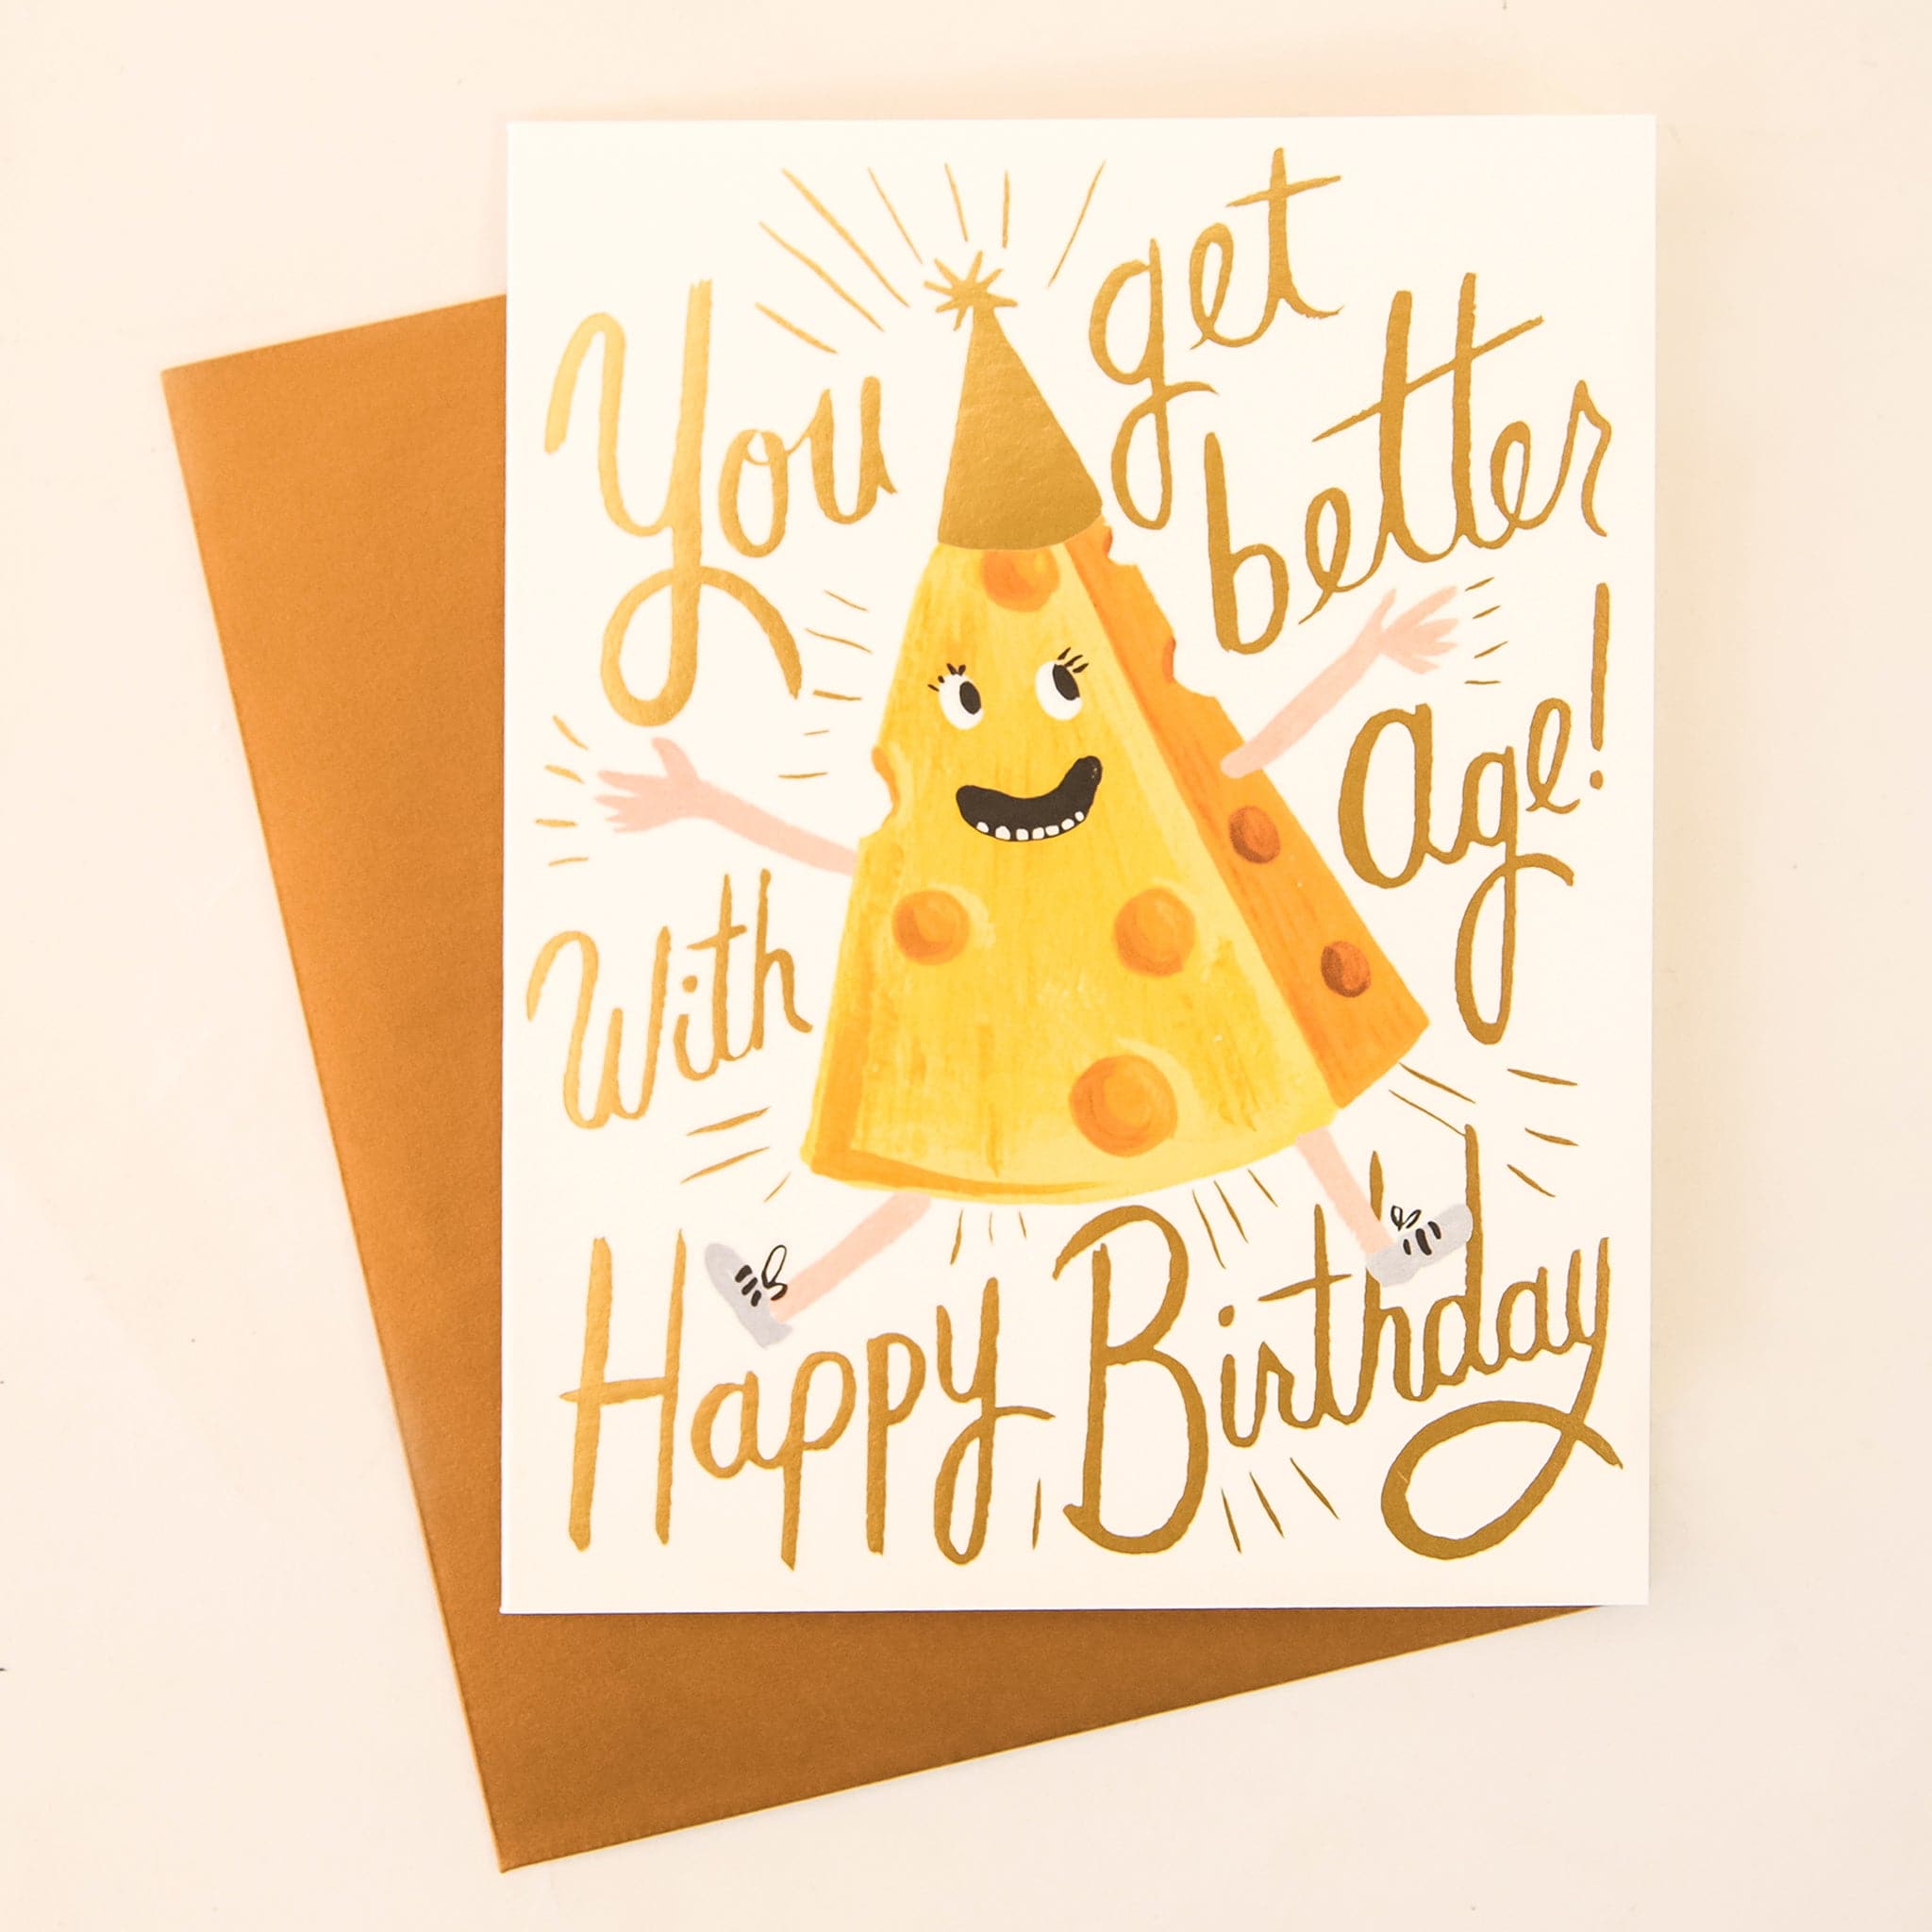 A white card with a yellow slice of cheese with a smiling face and birthday hat along with cursive writing that reads, &quot;You get better with age! Happy Birthday&quot;.